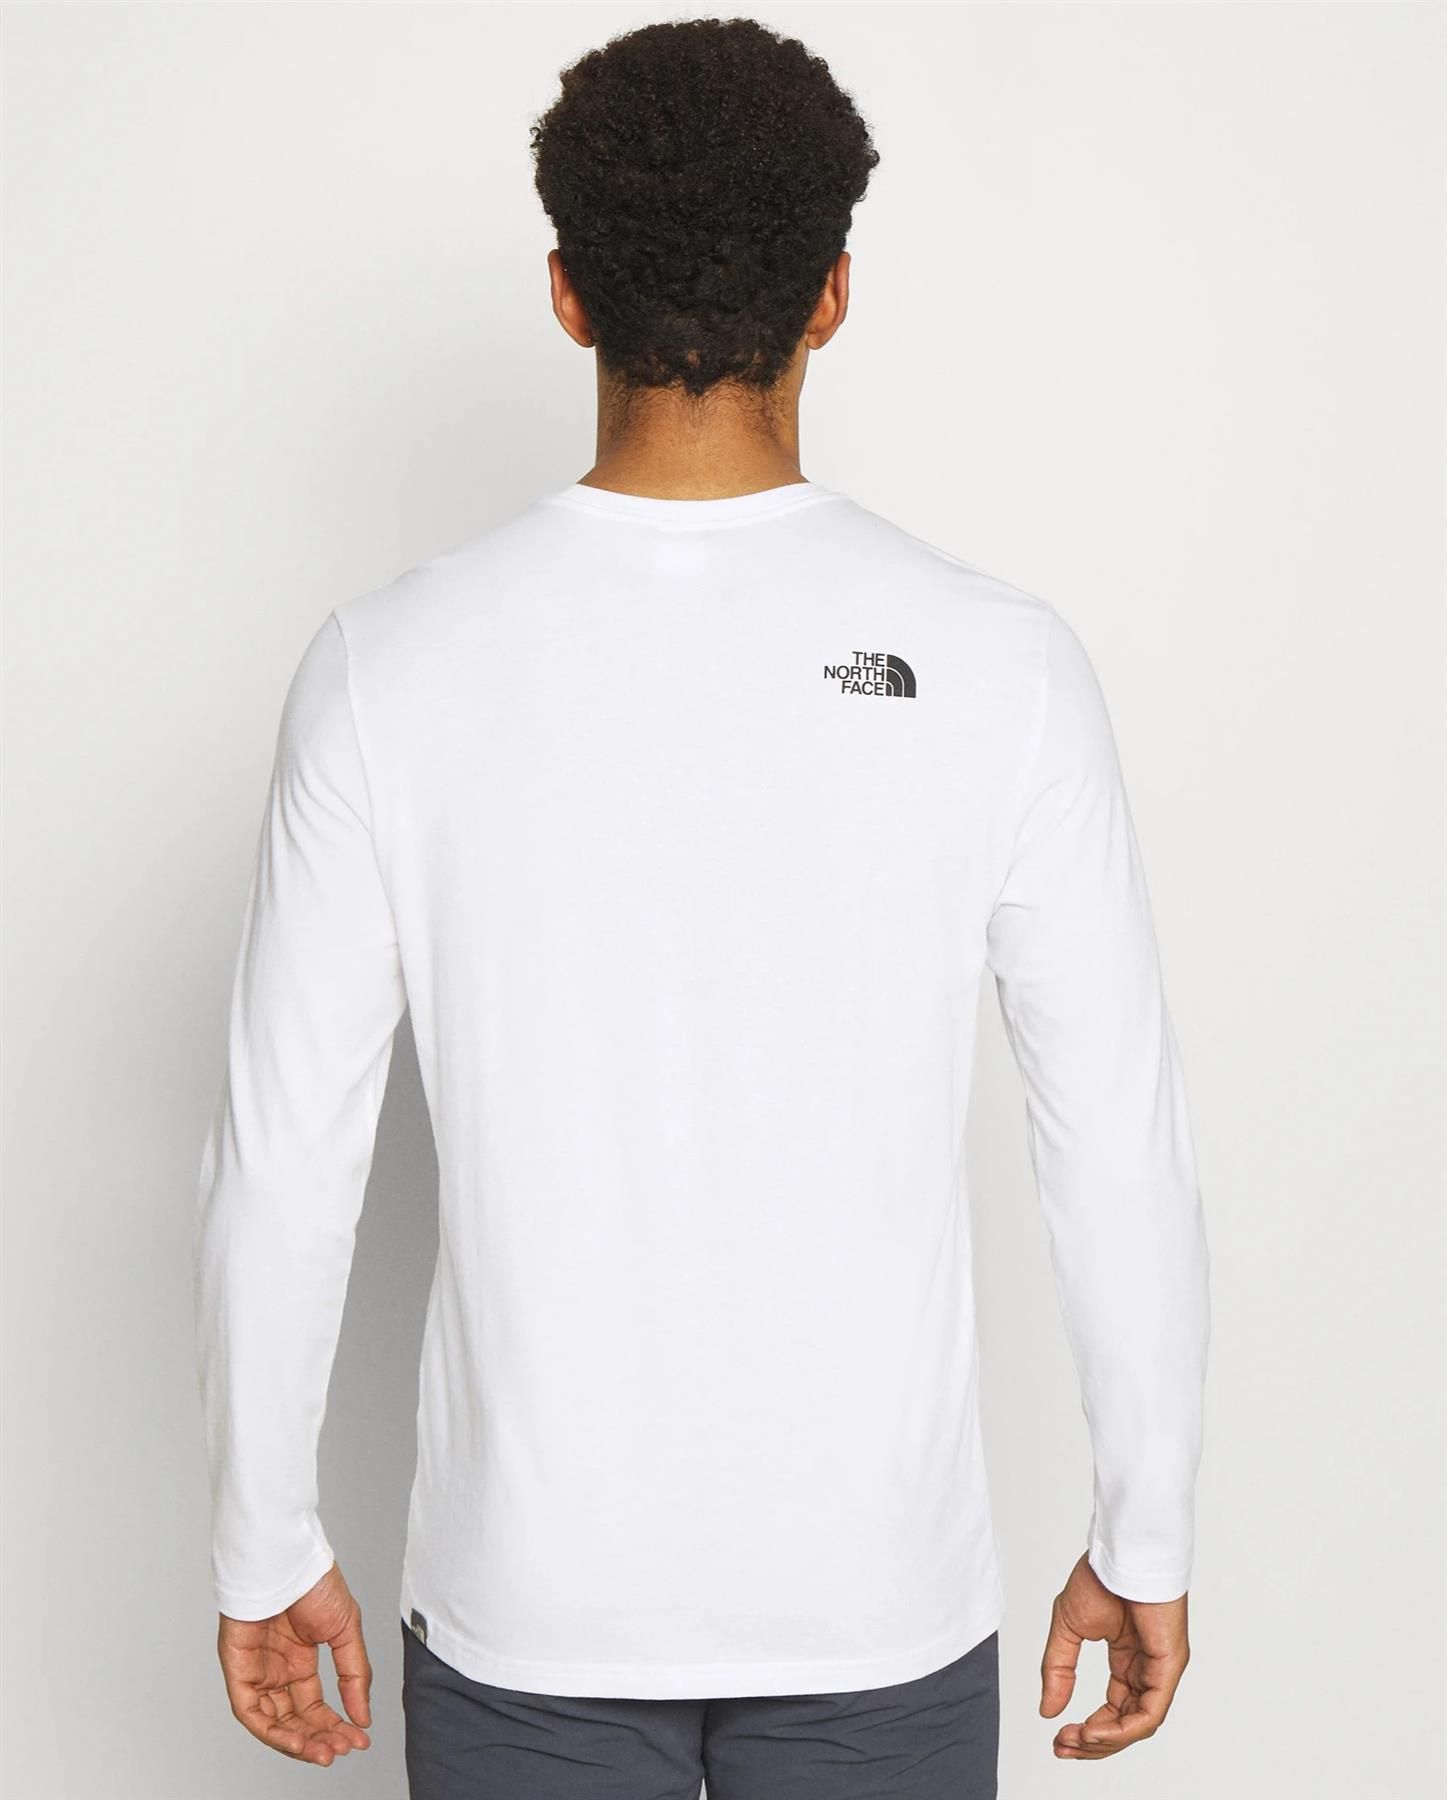 The North Face Mens Graphic Print T Shirt.      
Long Sleeve T-shirt with Graphic on Centre Chest.      
The Logo on the Front and Back, Jersey Knit Fabric.      
The North Face Graphic Long Sleeve T-shirt Is Soft and Uncomplicated, Which Means It's Incredibly Comfortable.      
It's Smooth, Uncomplicated and Features Original Graphics.